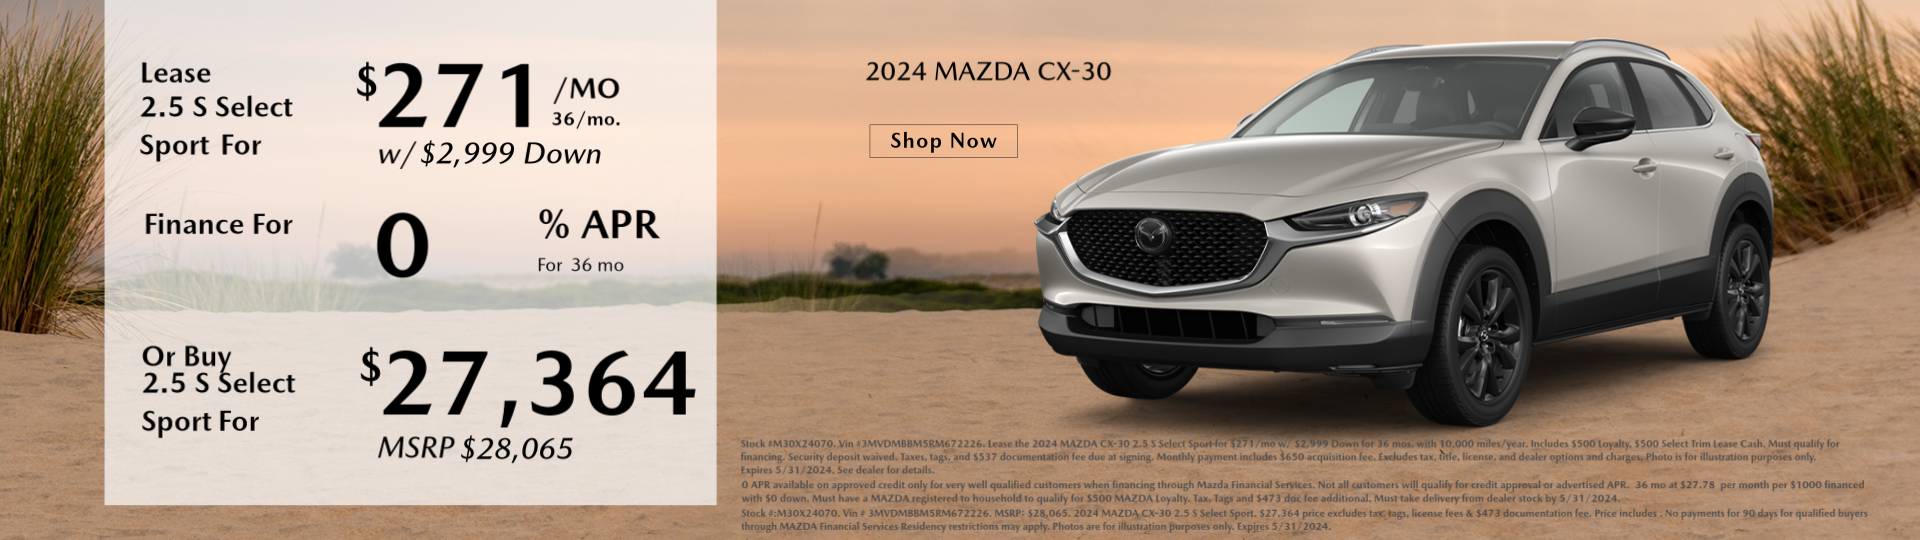 Don't miss our New MAZDA CX-30 Offers at Chapman Mazda New Jersey!